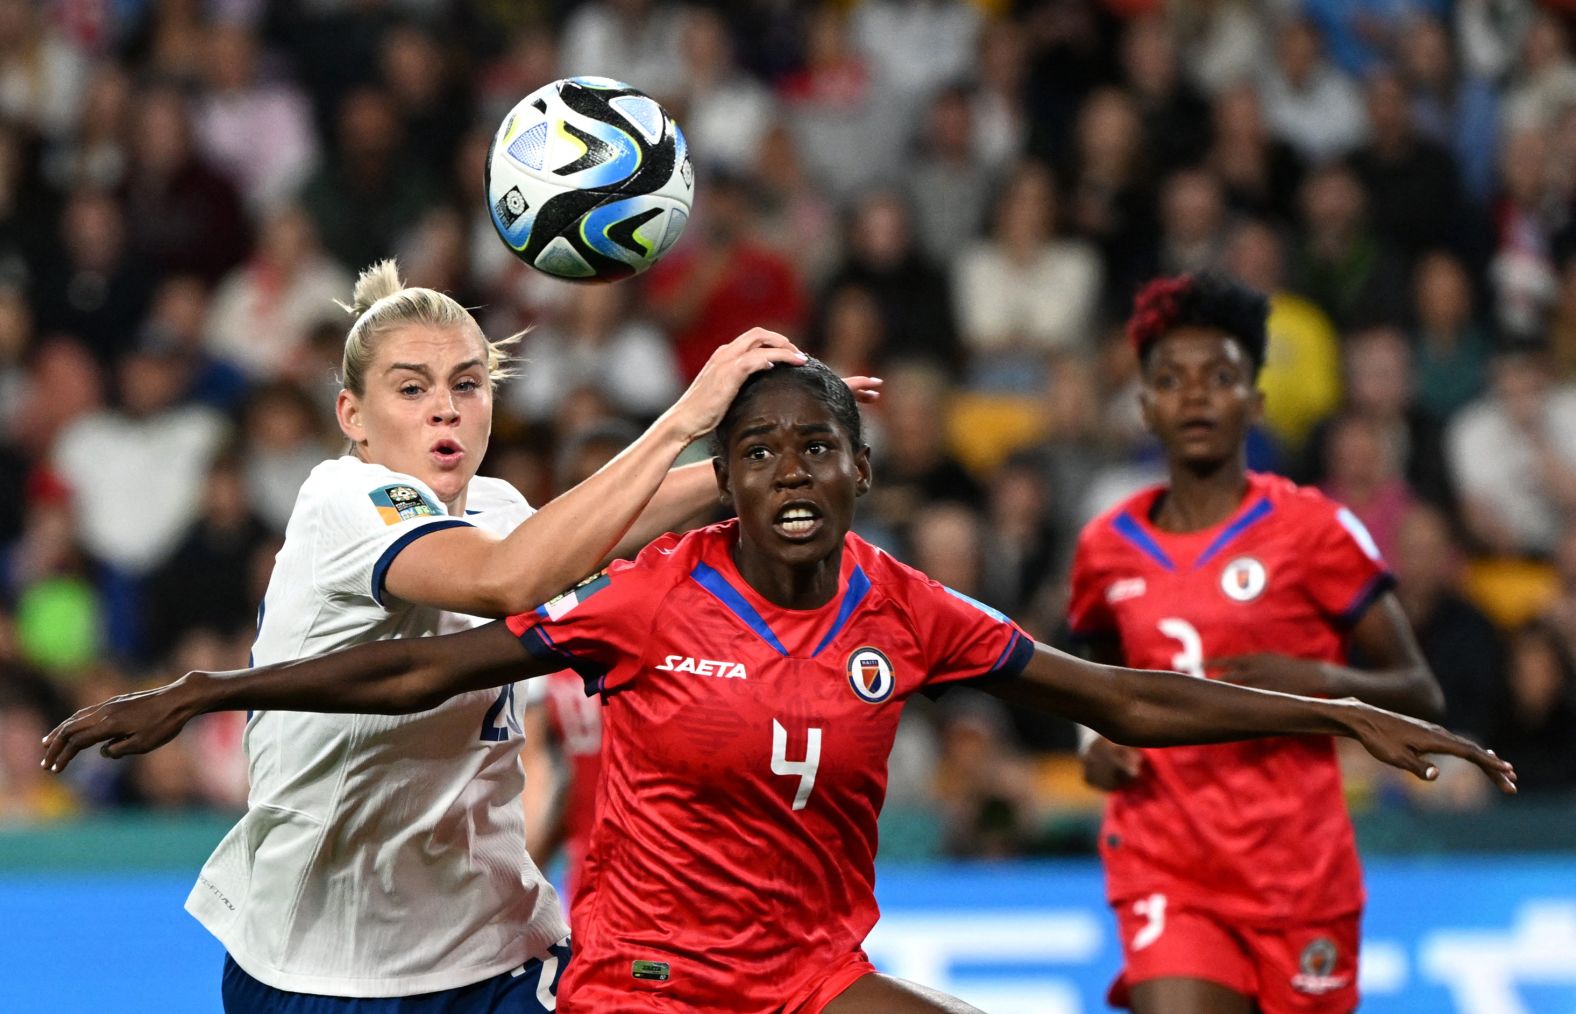 England's Alessia Russo and Haiti's Tabita Joseph fight for the ball during the two sides' opening game on July 22. England's Lionesses, the reigning European champions, earned a scrappy 1-0 victory over the tournament debutants.